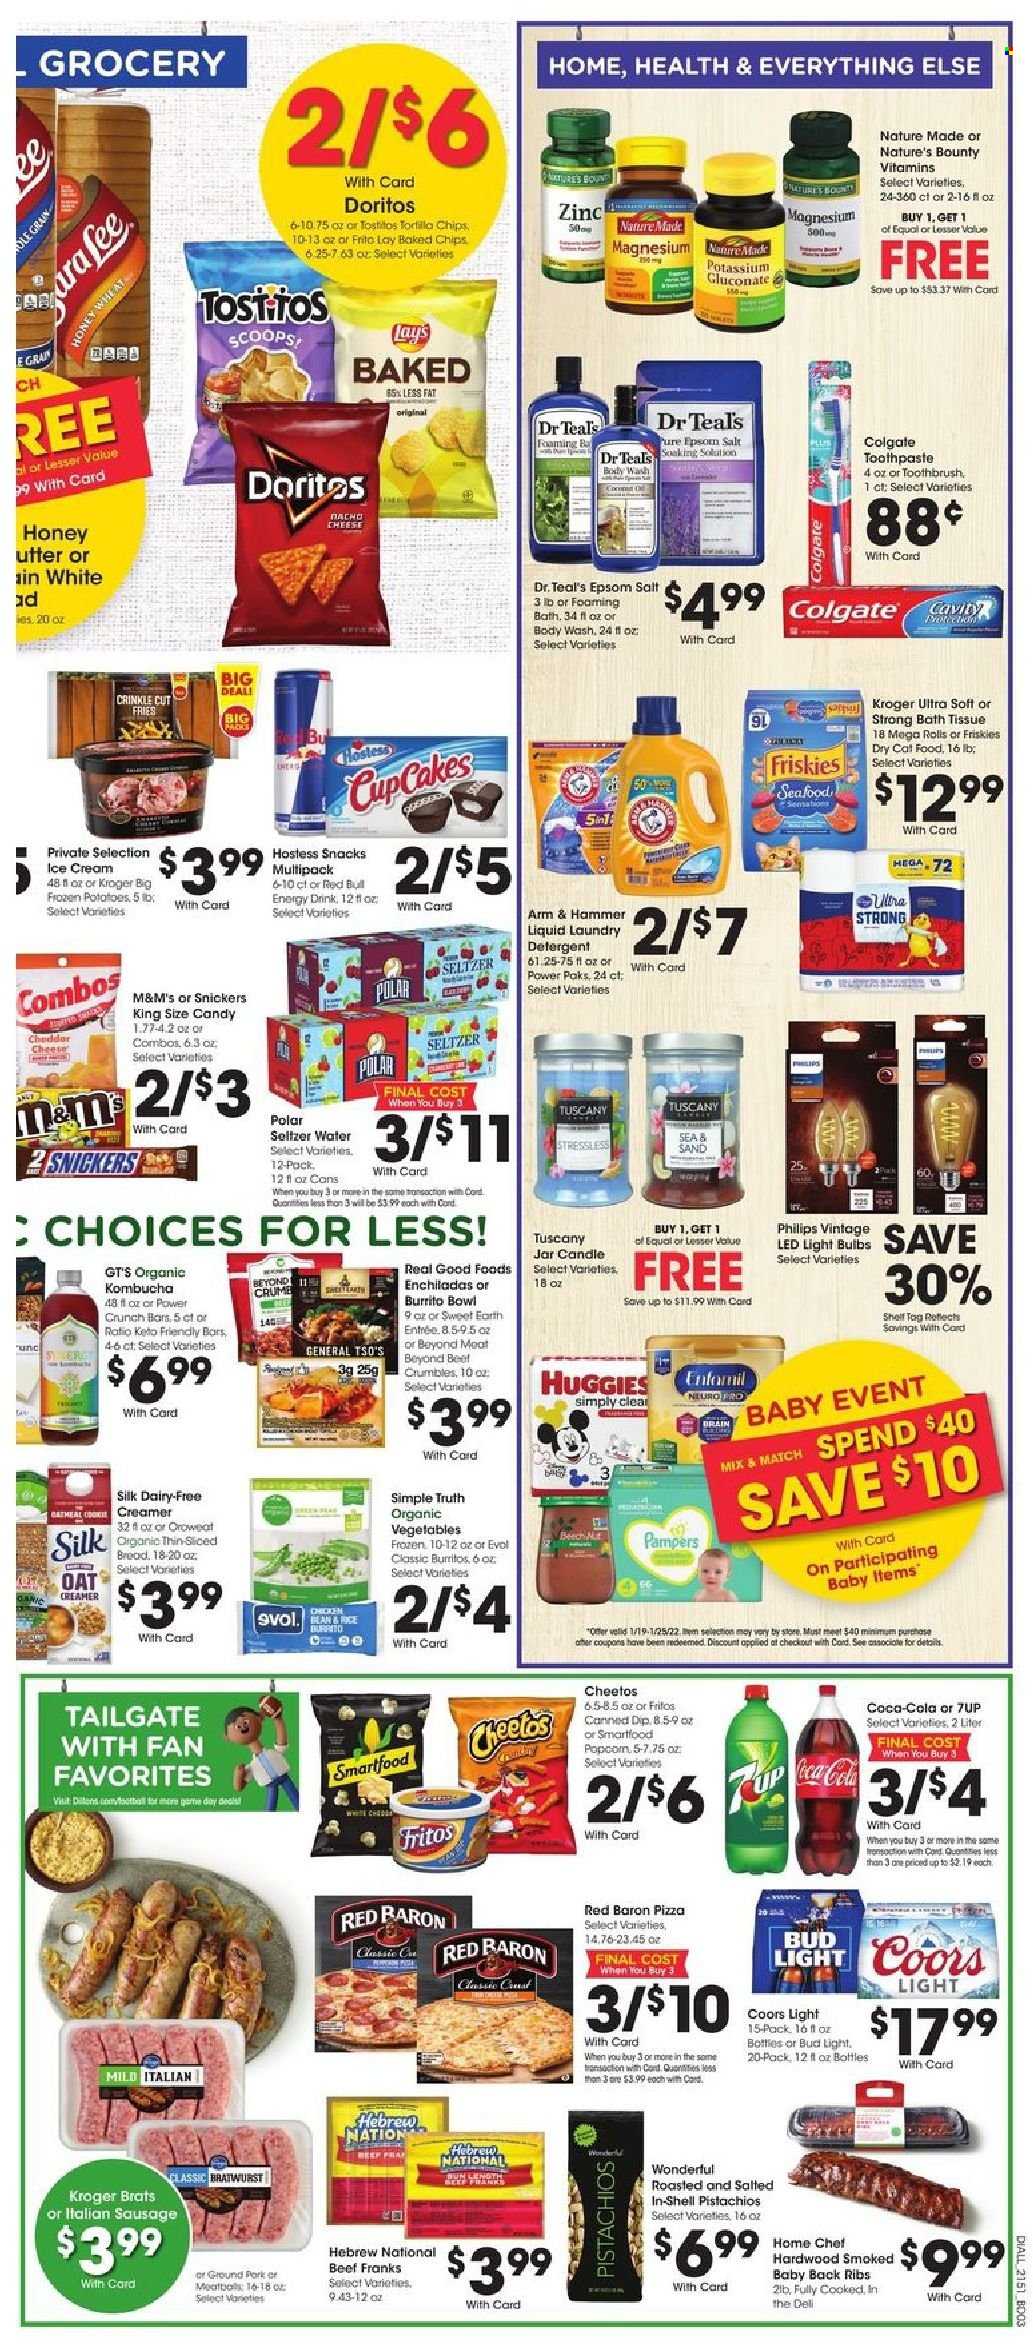 thumbnail - Dillons Flyer - 01/19/2022 - 01/25/2022 - Sales products - enchiladas, pizza, burrito, bratwurst, italian sausage, Silk, creamer, dip, ice cream, potato fries, Red Baron, snack, Snickers, M&M's, Doritos, Fritos, tortilla chips, Cheetos, Lay’s, Smartfood, Tostitos, ARM & HAMMER, oats, honey, pistachios, Coca-Cola, energy drink, 7UP, seltzer water, kombucha, beer, Bud Light, ground pork, pork meat, pork ribs, pork back ribs, Huggies, Pampers, bath tissue, detergent, laundry detergent, body wash, Colgate, toothbrush, toothpaste, bowl, candle, bulb, light bulb, Philips, dry cat food, Friskies, LED light, Shell, magnesium, Nature Made, Nature's Bounty, zinc, Coors. Page 6.